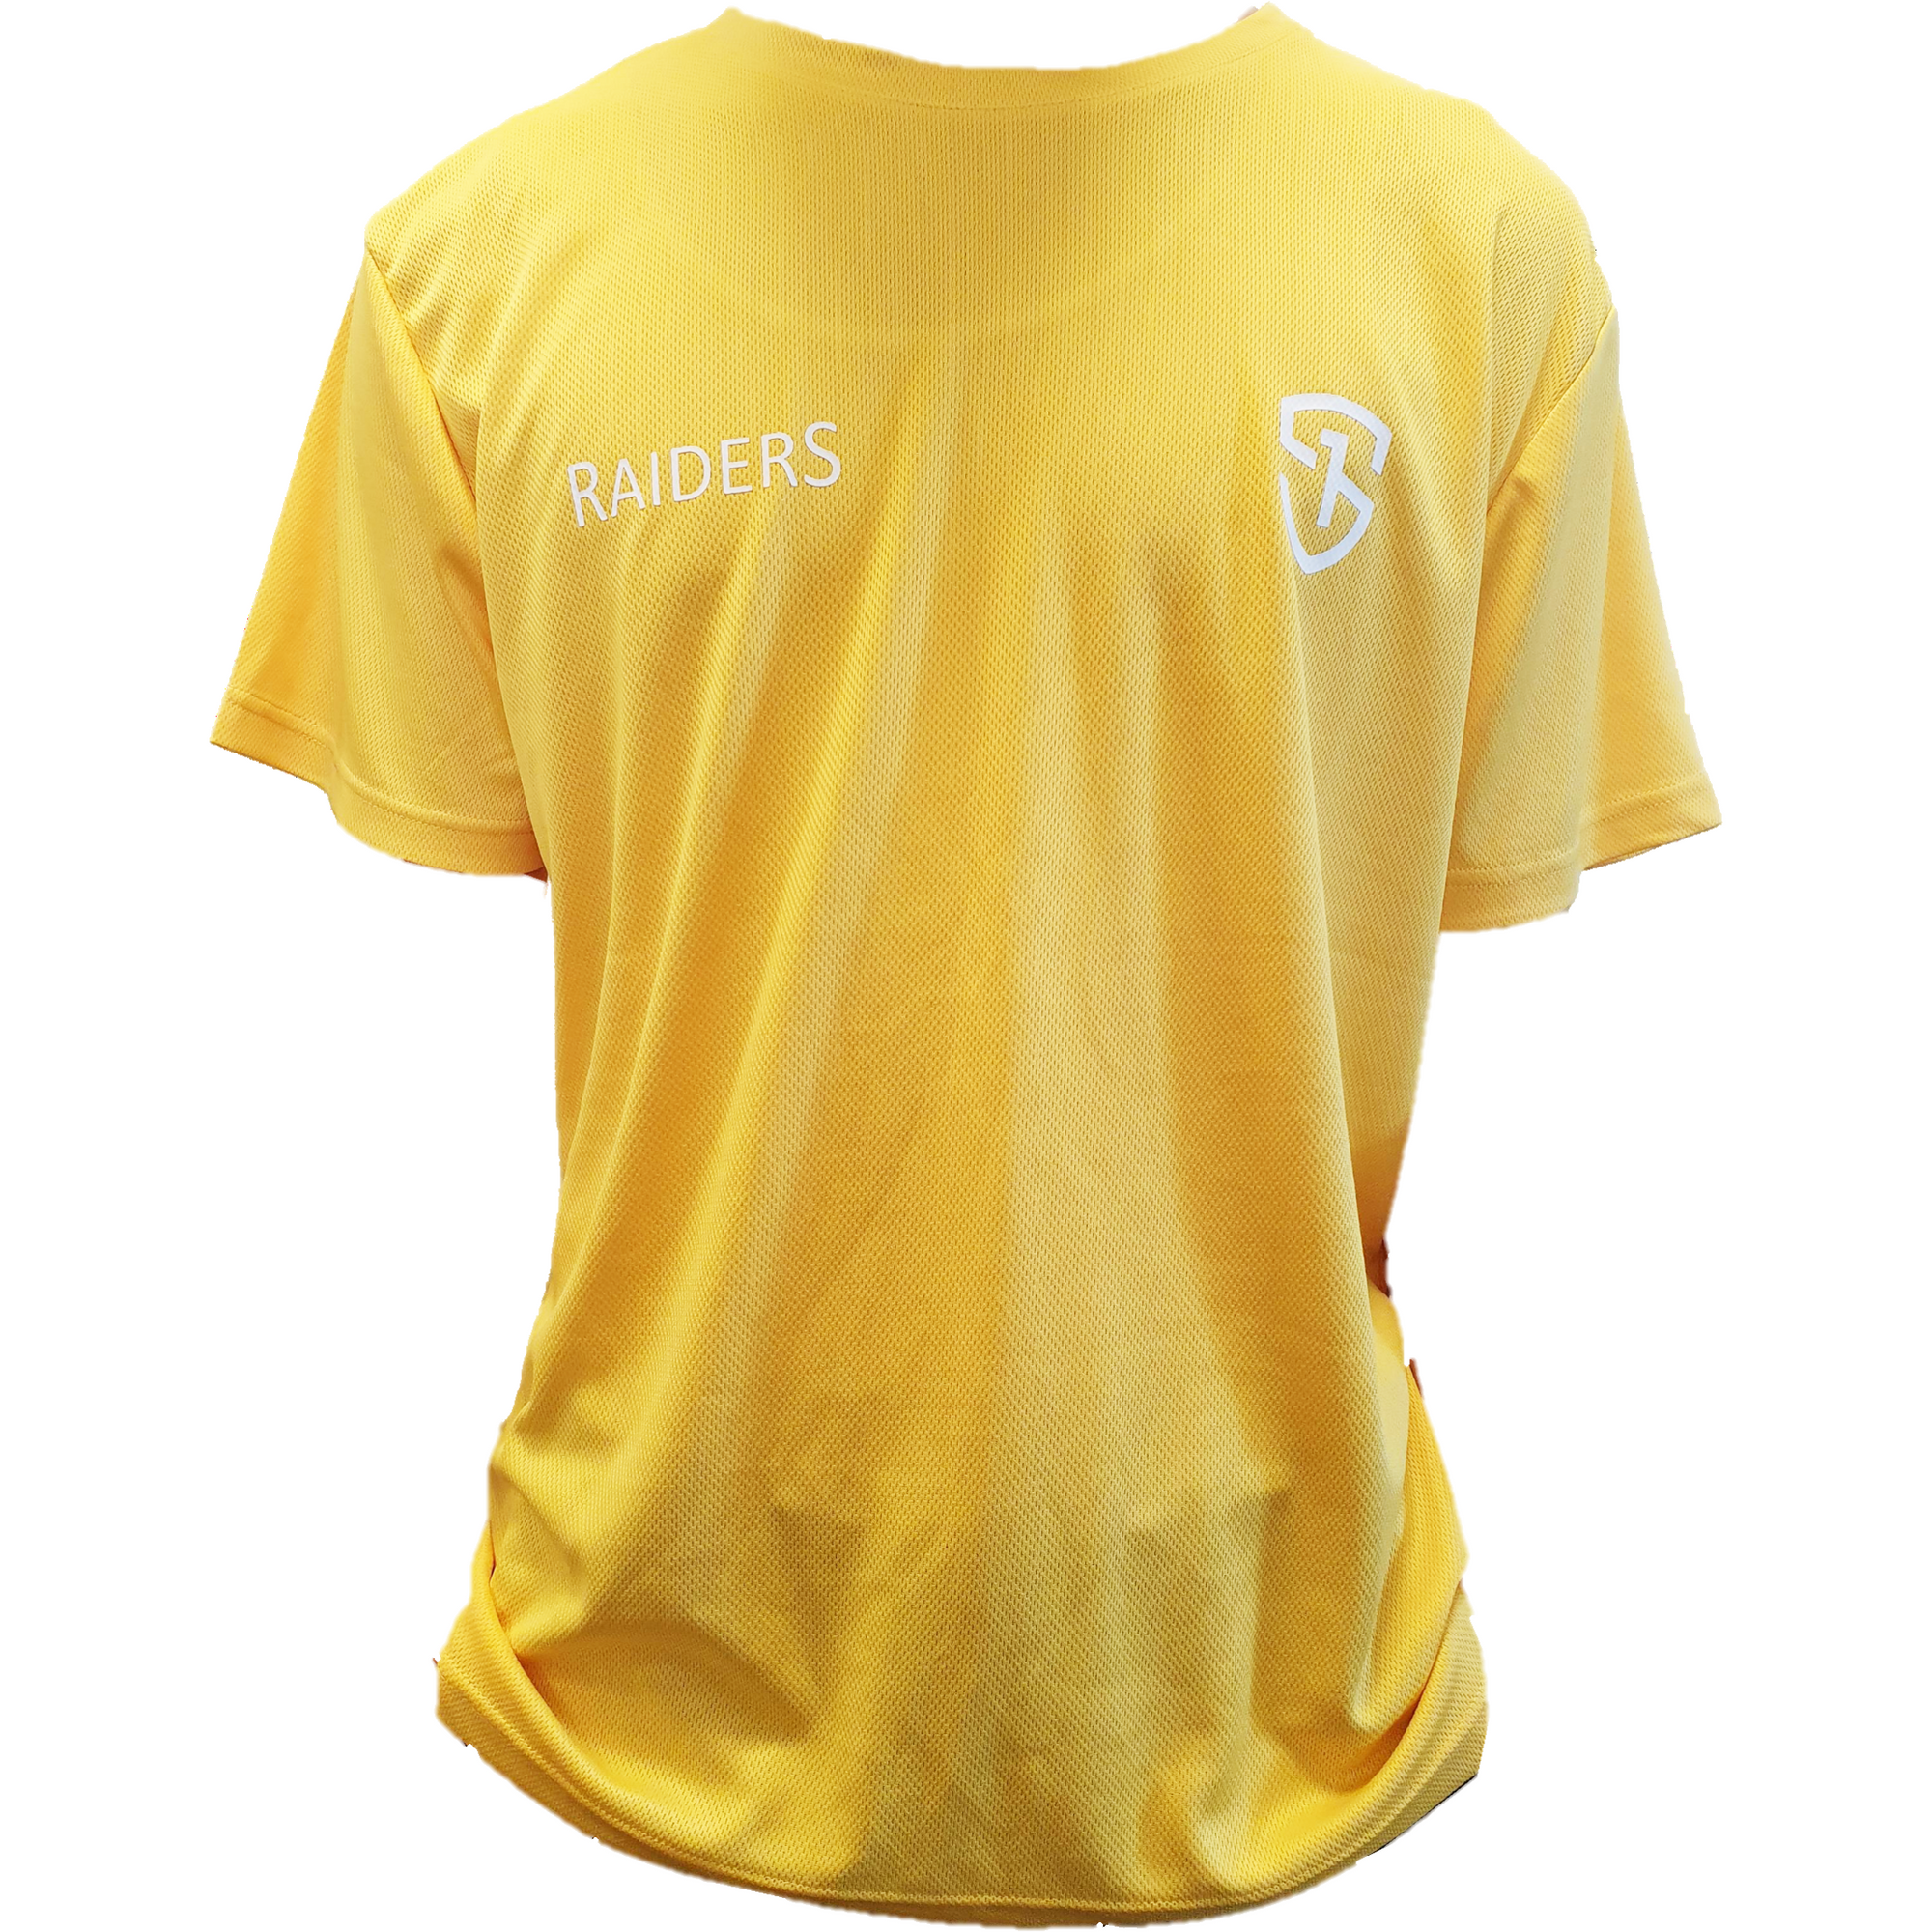 House Team Sports T-shirt Yellow Size 26